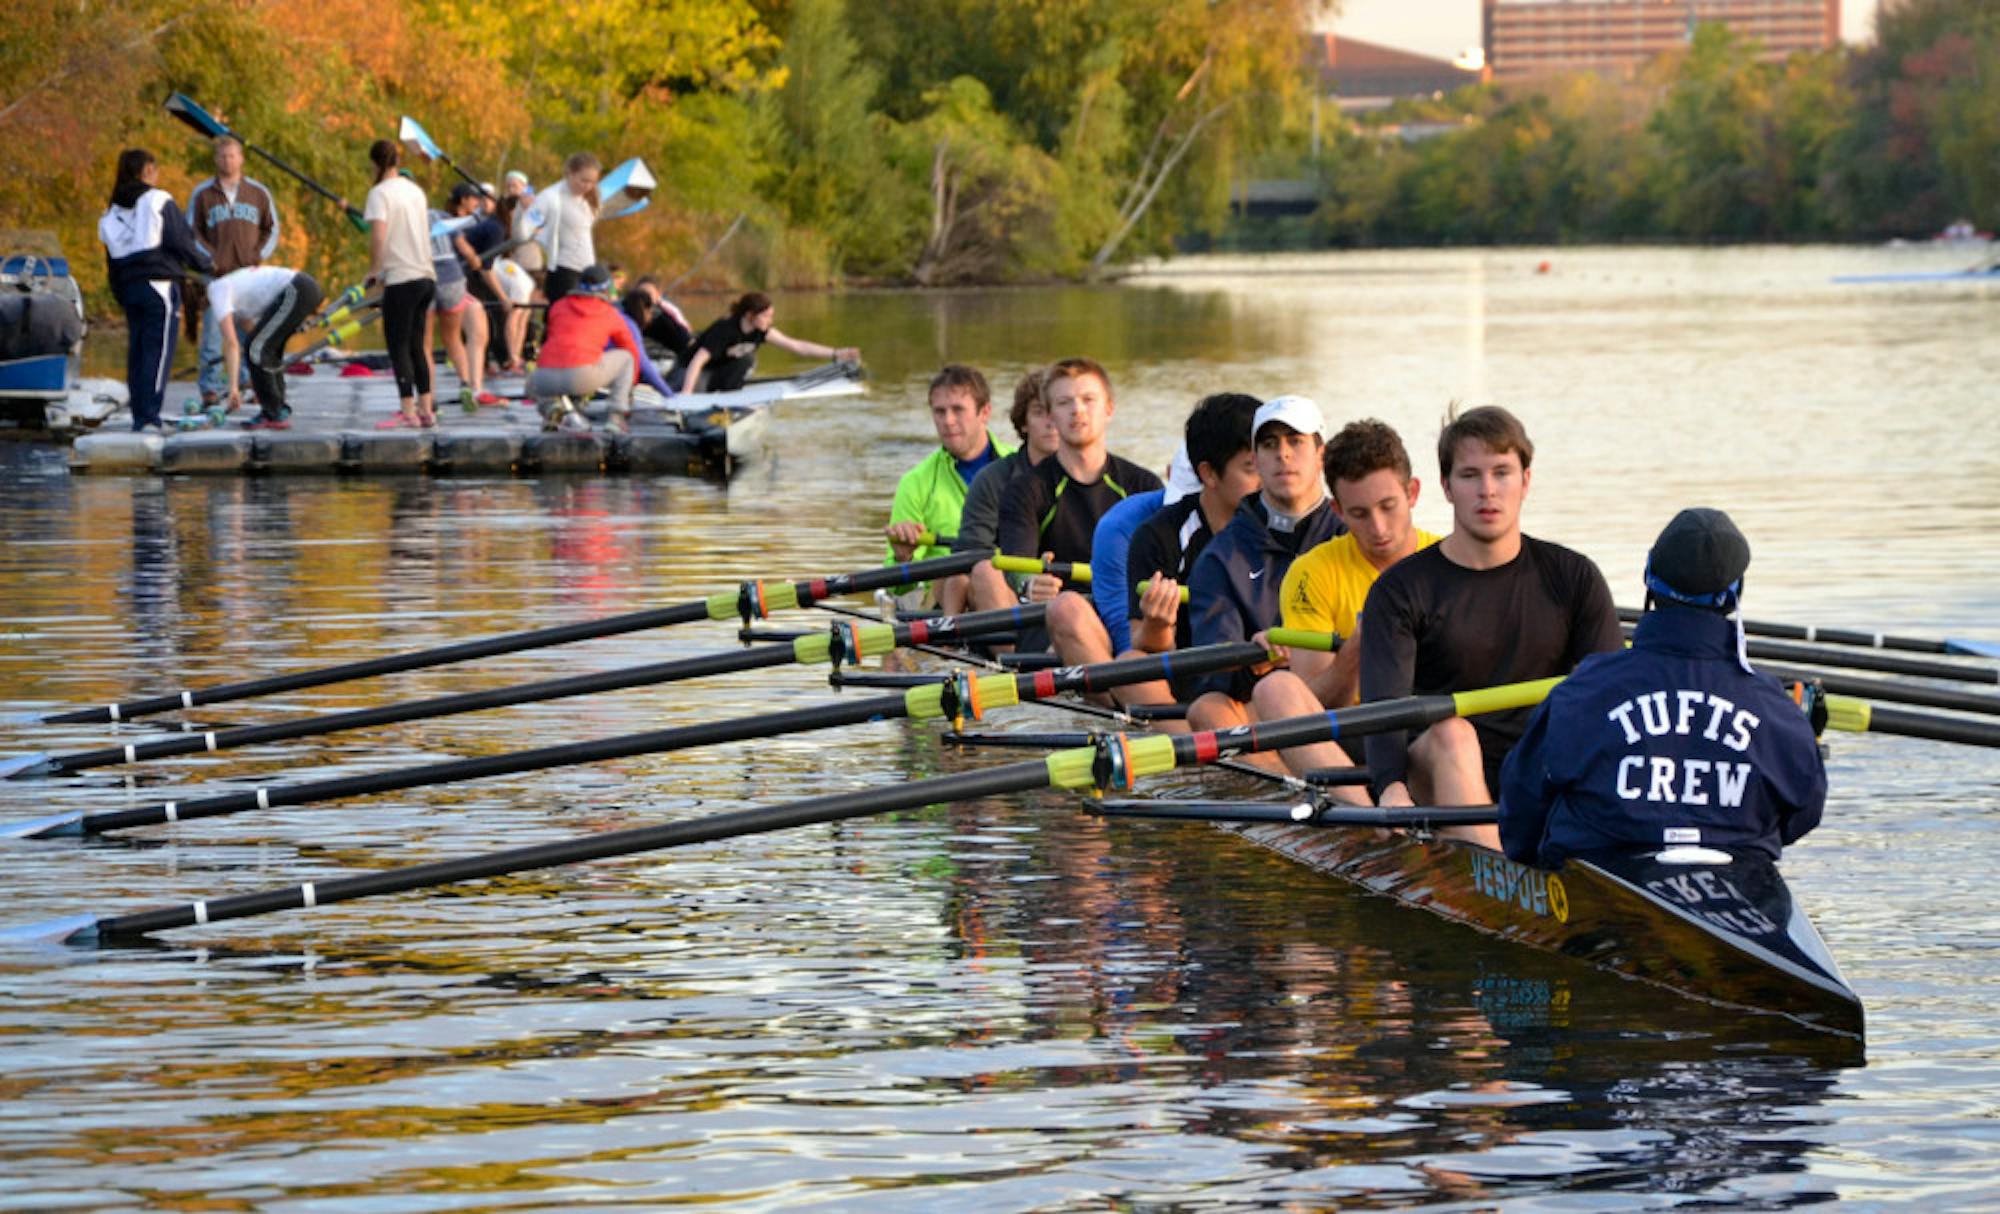 Crew teams earn a pair of second place finishes at the Head of the Fish